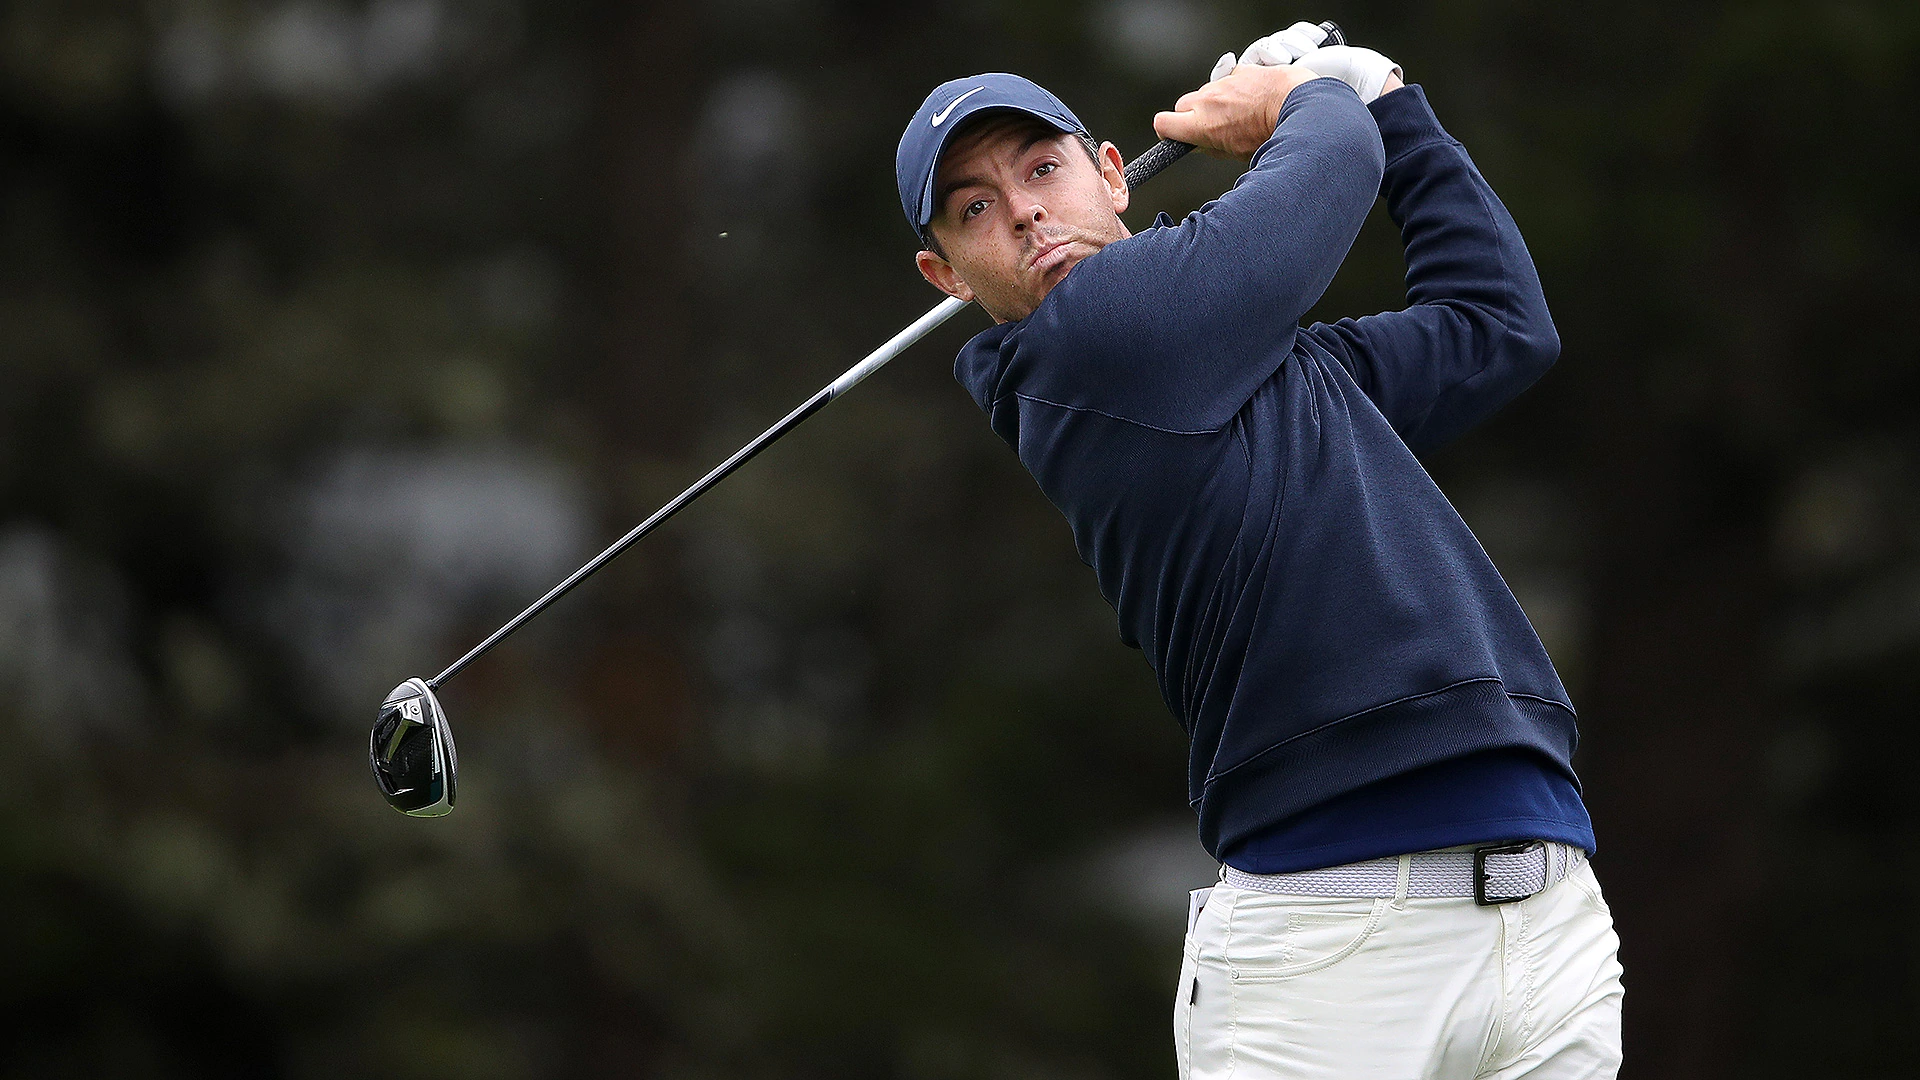 Rory McIlroy on gaining distance: Want to ‘know I have it if I need it’